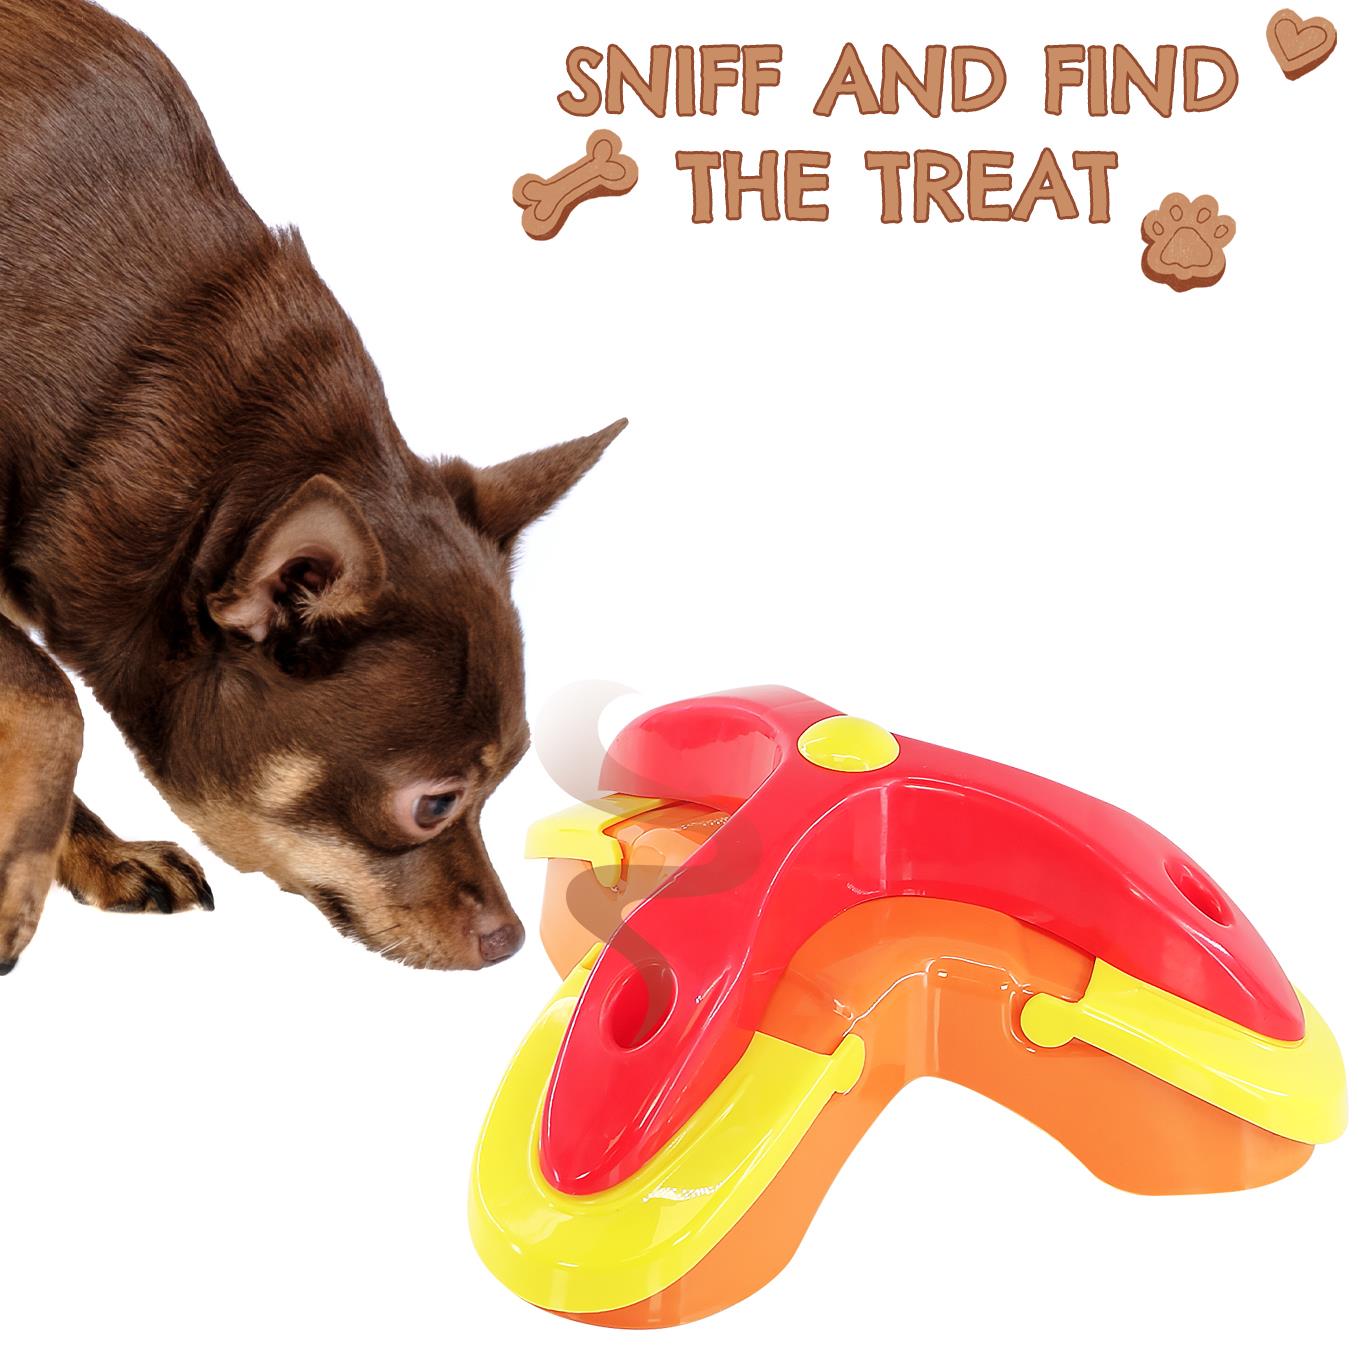 Dog Toy for Energetic Pups by The Magic Toy Shop - UKBuyZone